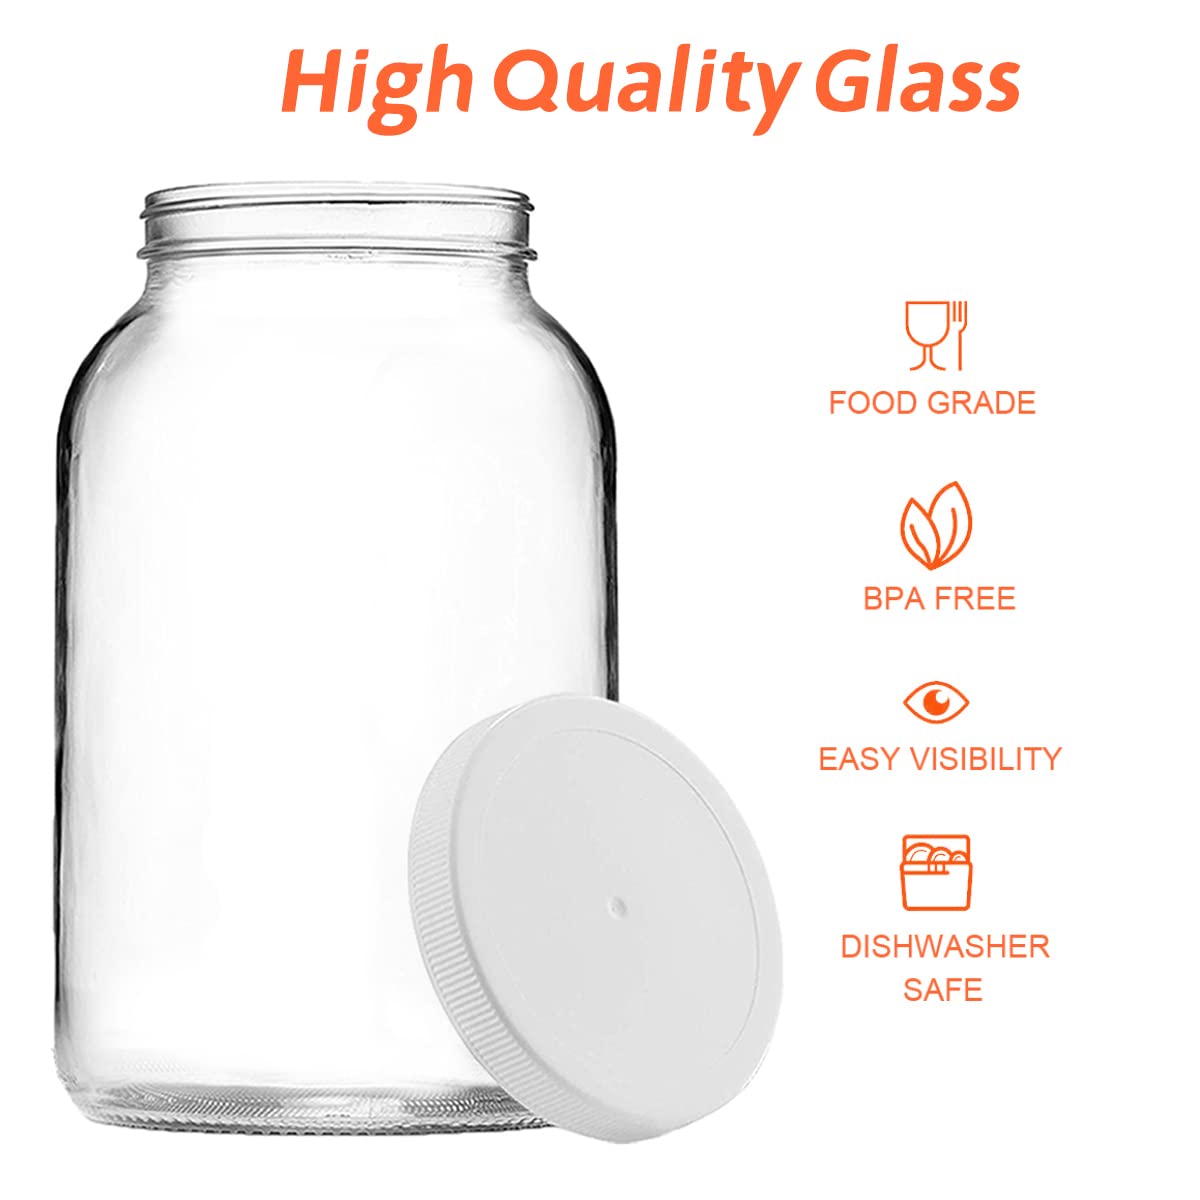 Artcome 4 Pack Glass Jar Set - 2pc 1 Gallon Glass Jar Wide Mouth with 2pc Airtight Plastic Lids, 2pc 16oz Glass Jar with 2pc Silver Metal Lids for Fermenting, Kimchi, Kefir, Kombucha, Storing, Canning